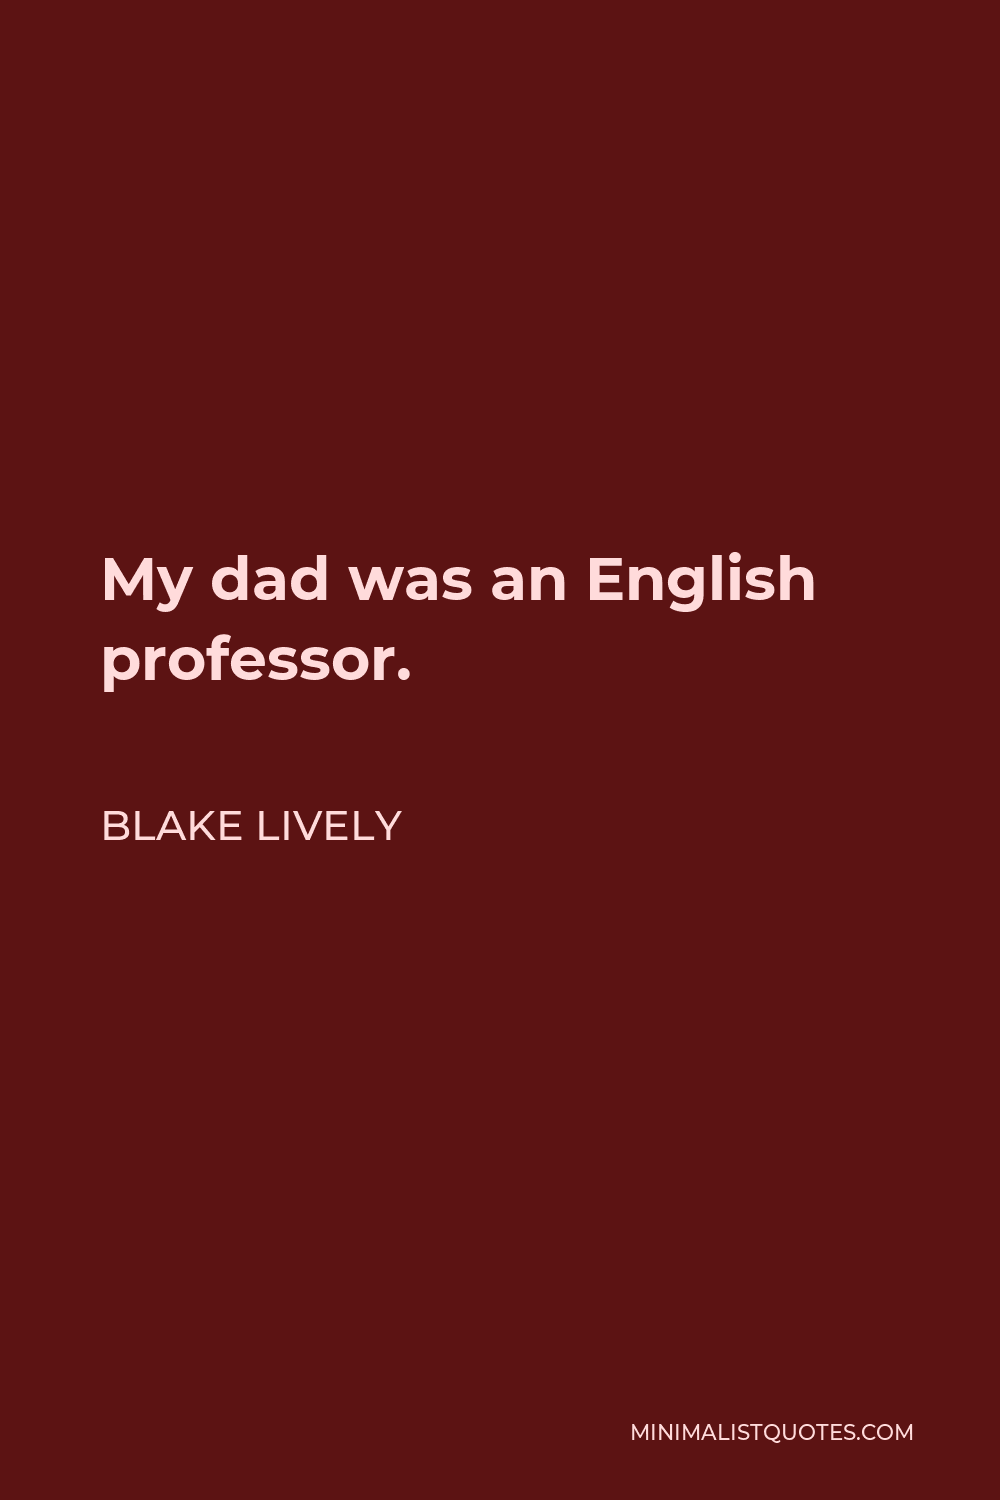 Blake Lively Quote - My dad was an English professor.